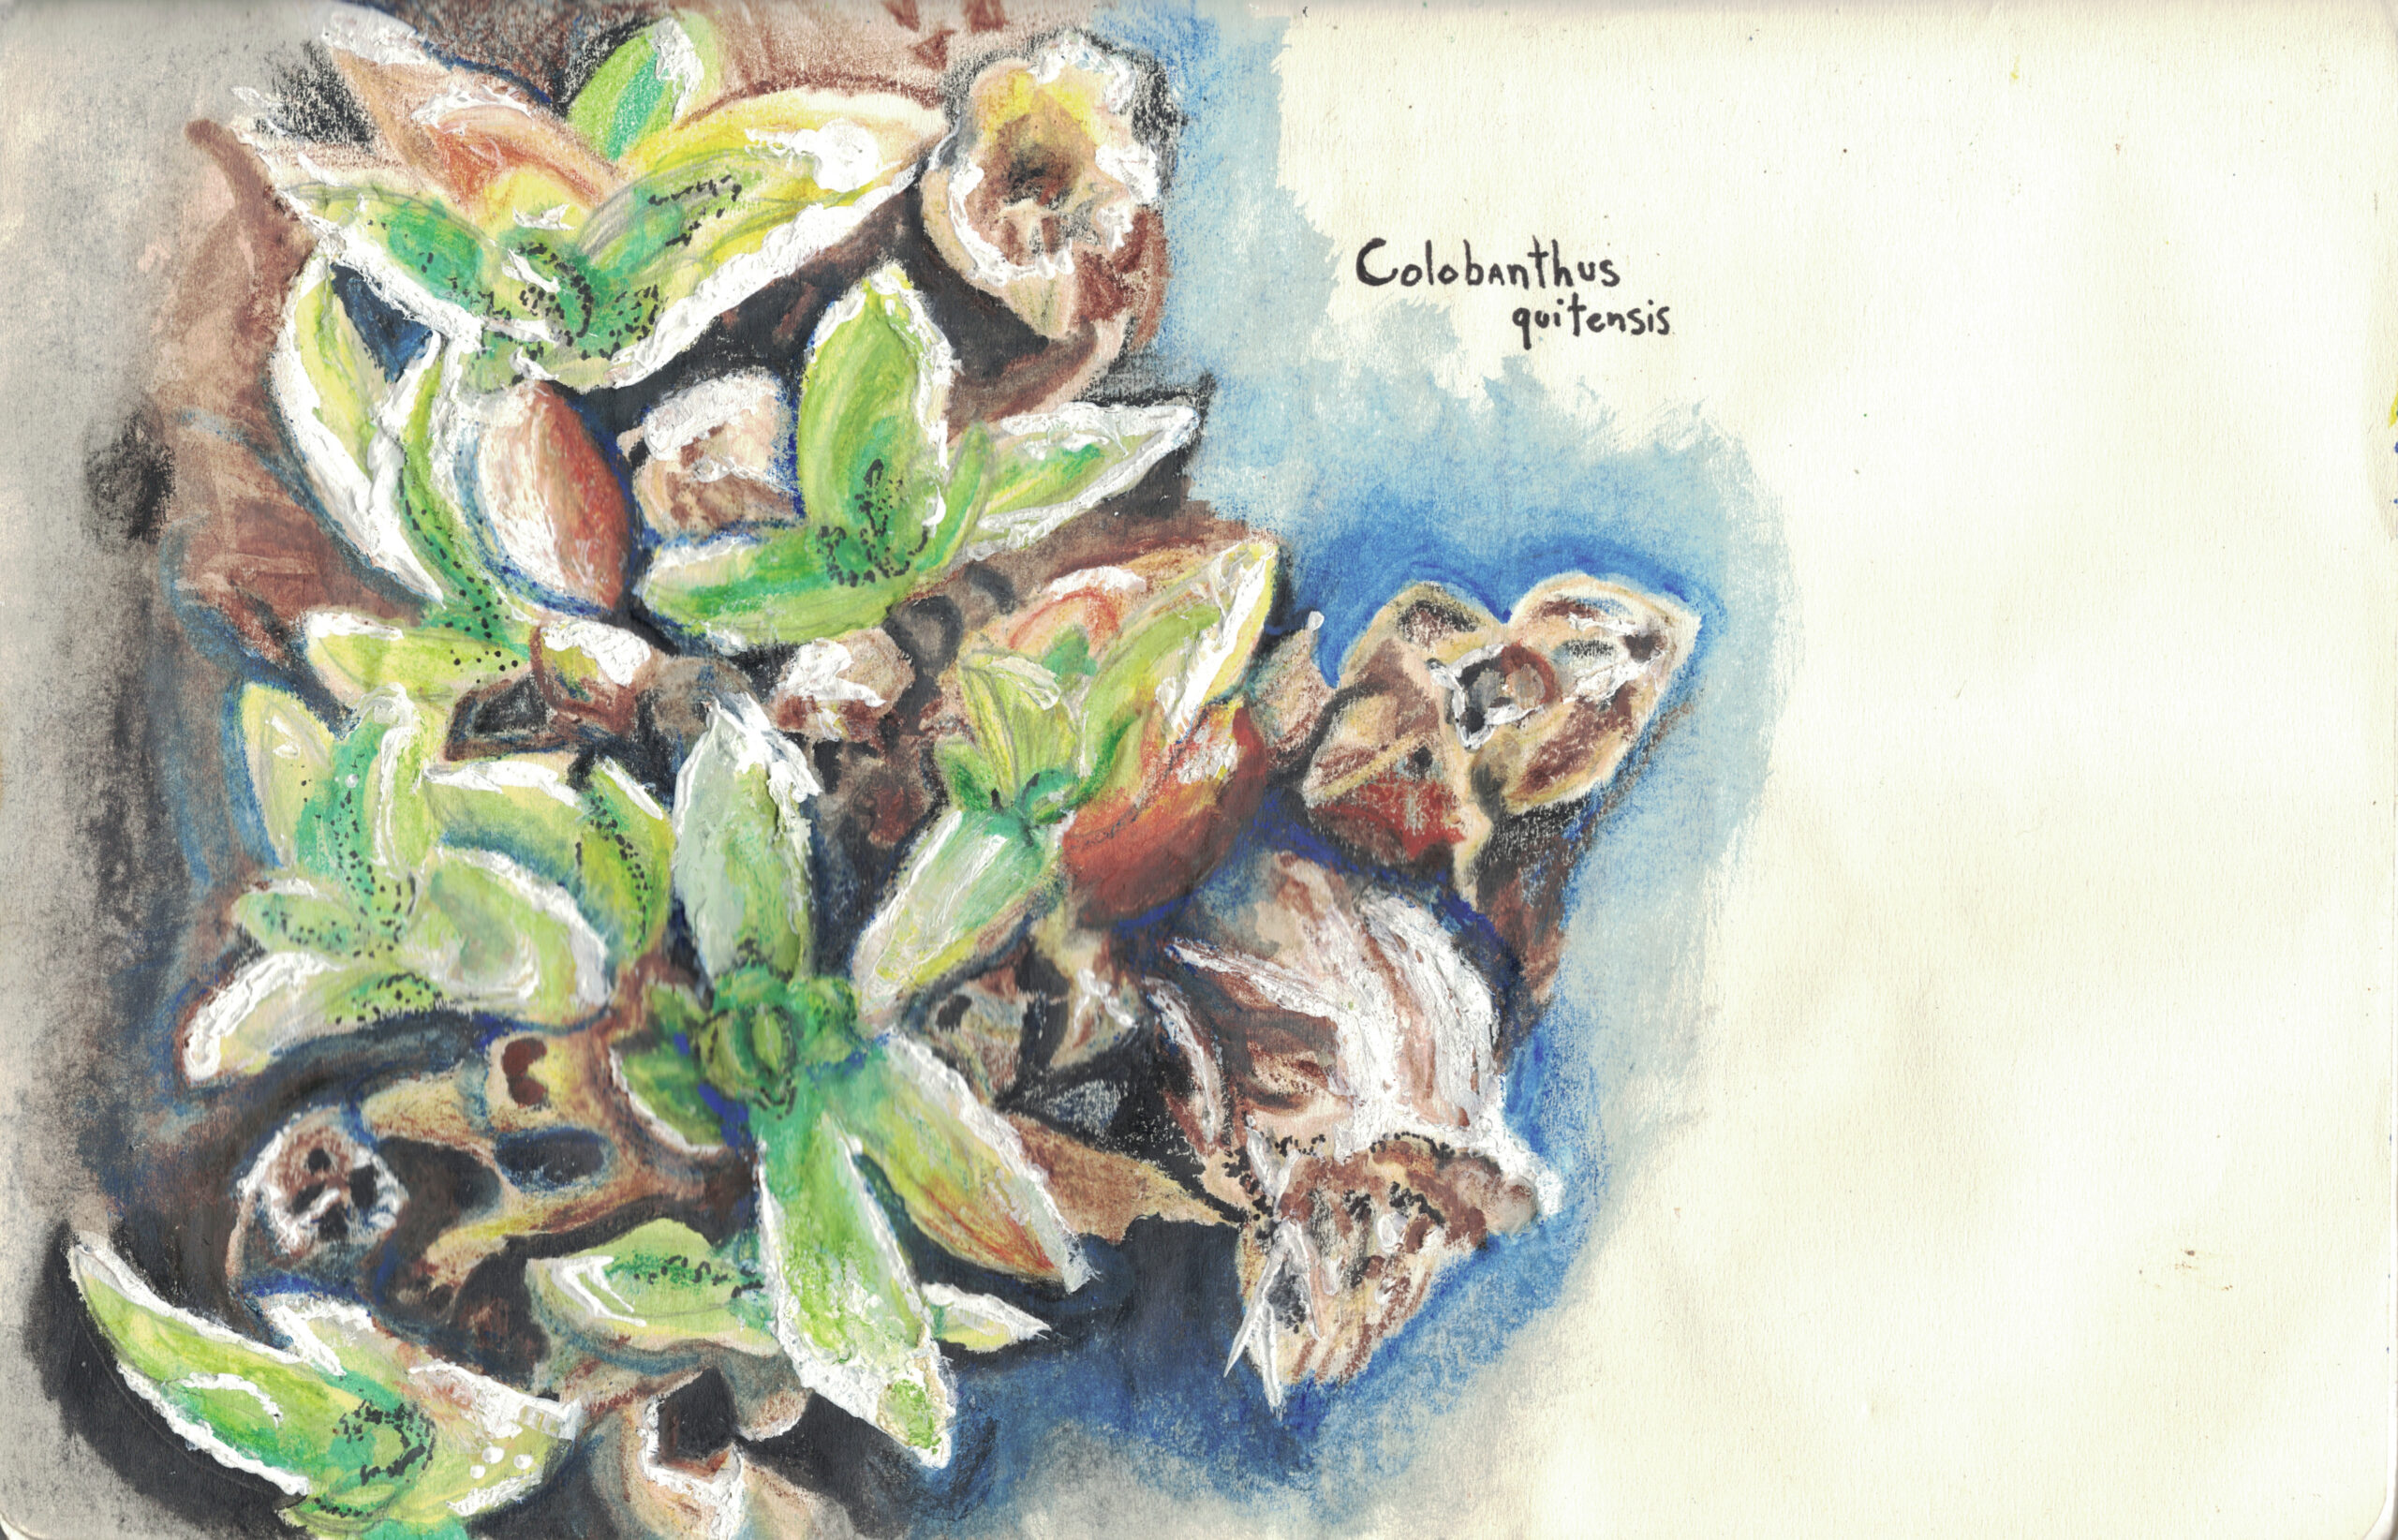 Colobanthus quitensis in ink and watercolor pencil by Samantha Elie